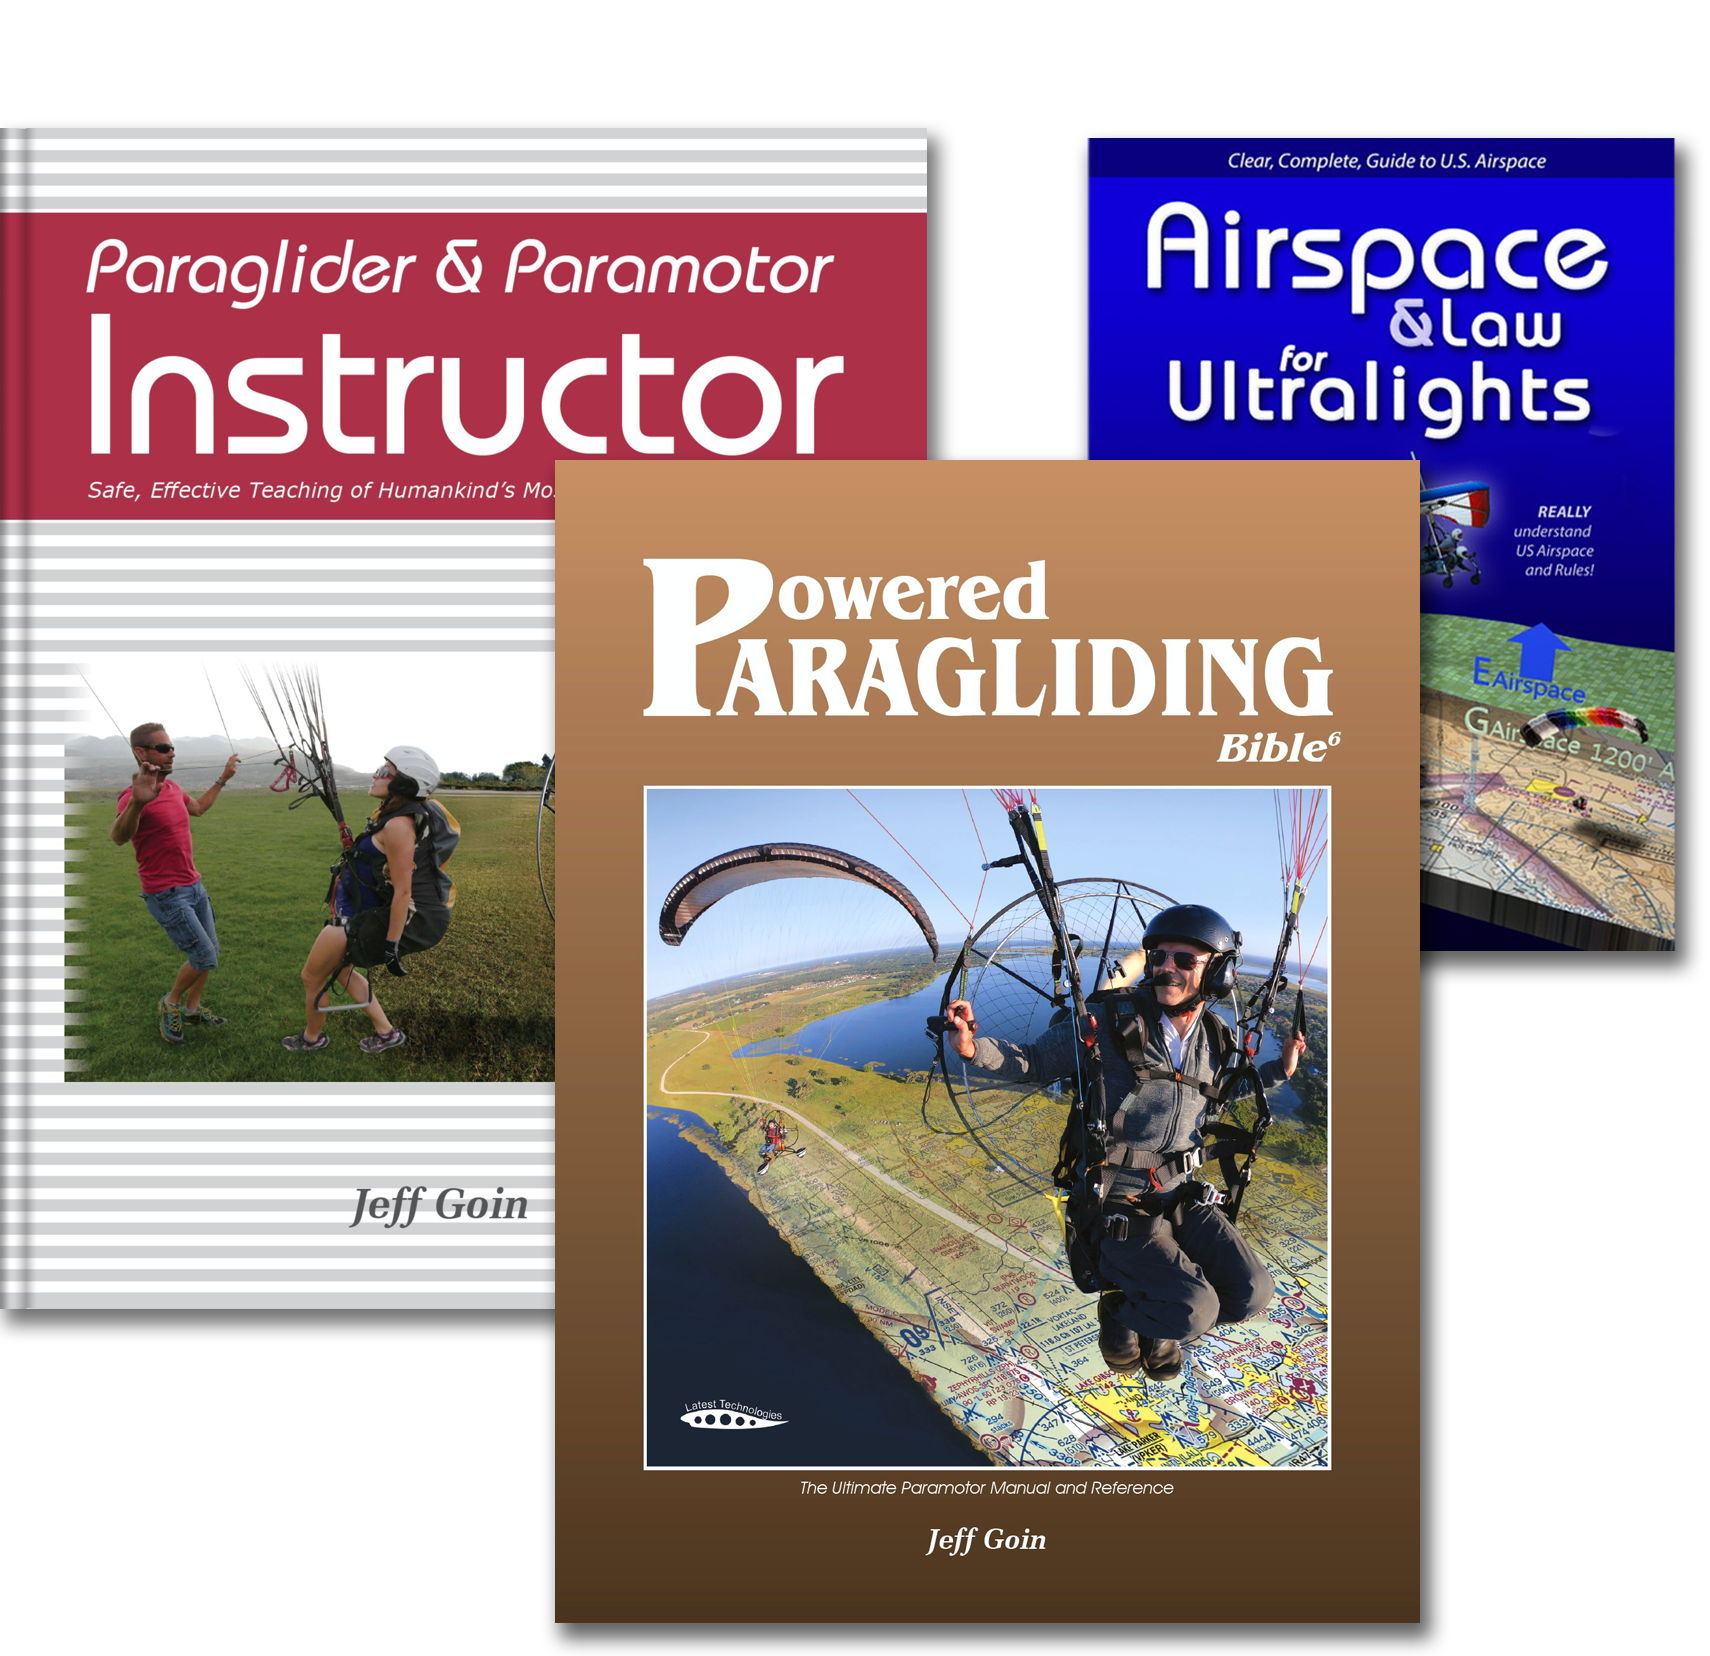 Paraglider & Paramotor Instructor Book by Jeff Goin 